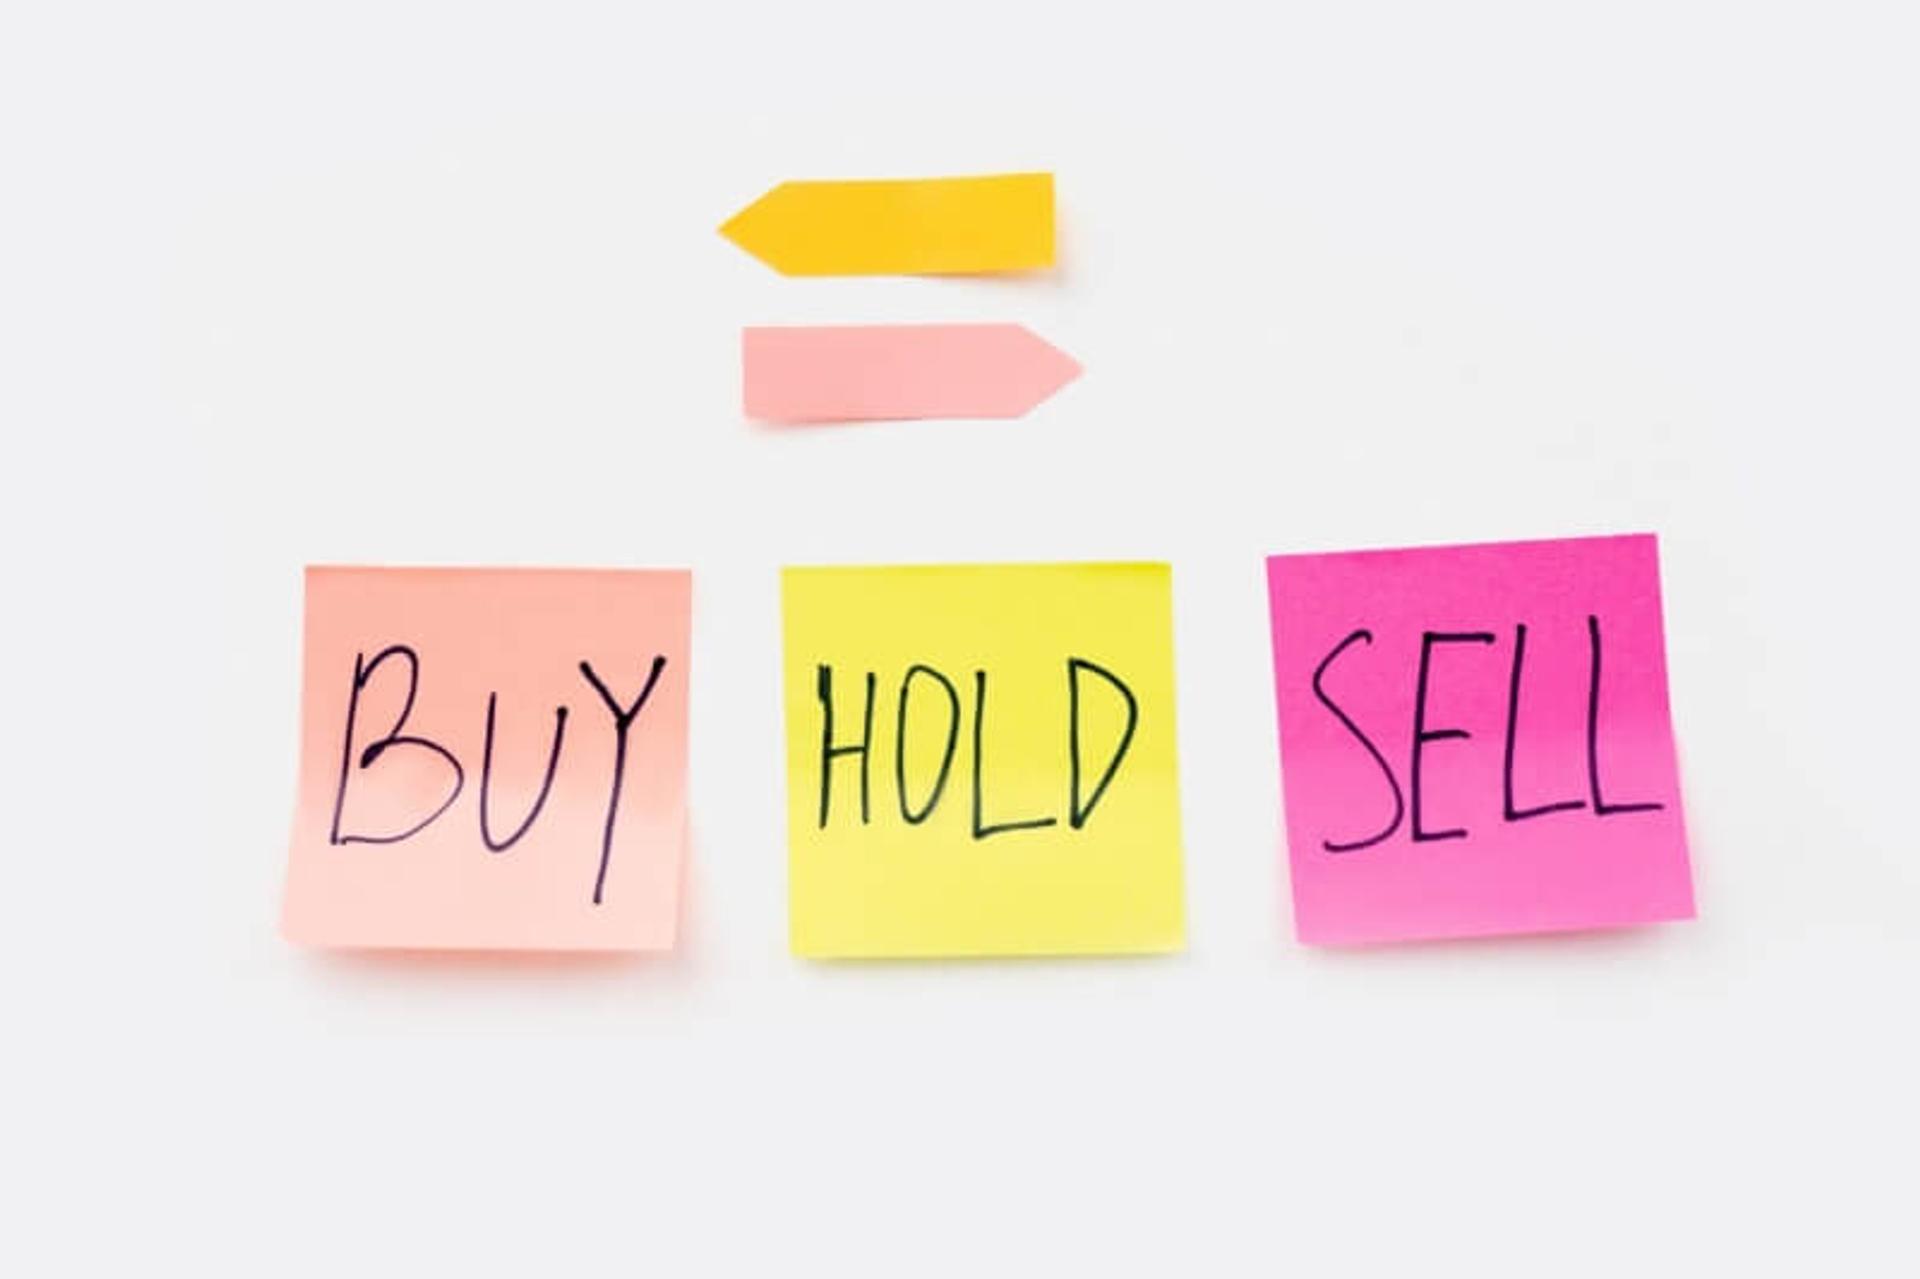 Buy, hold, and sell sticky notes